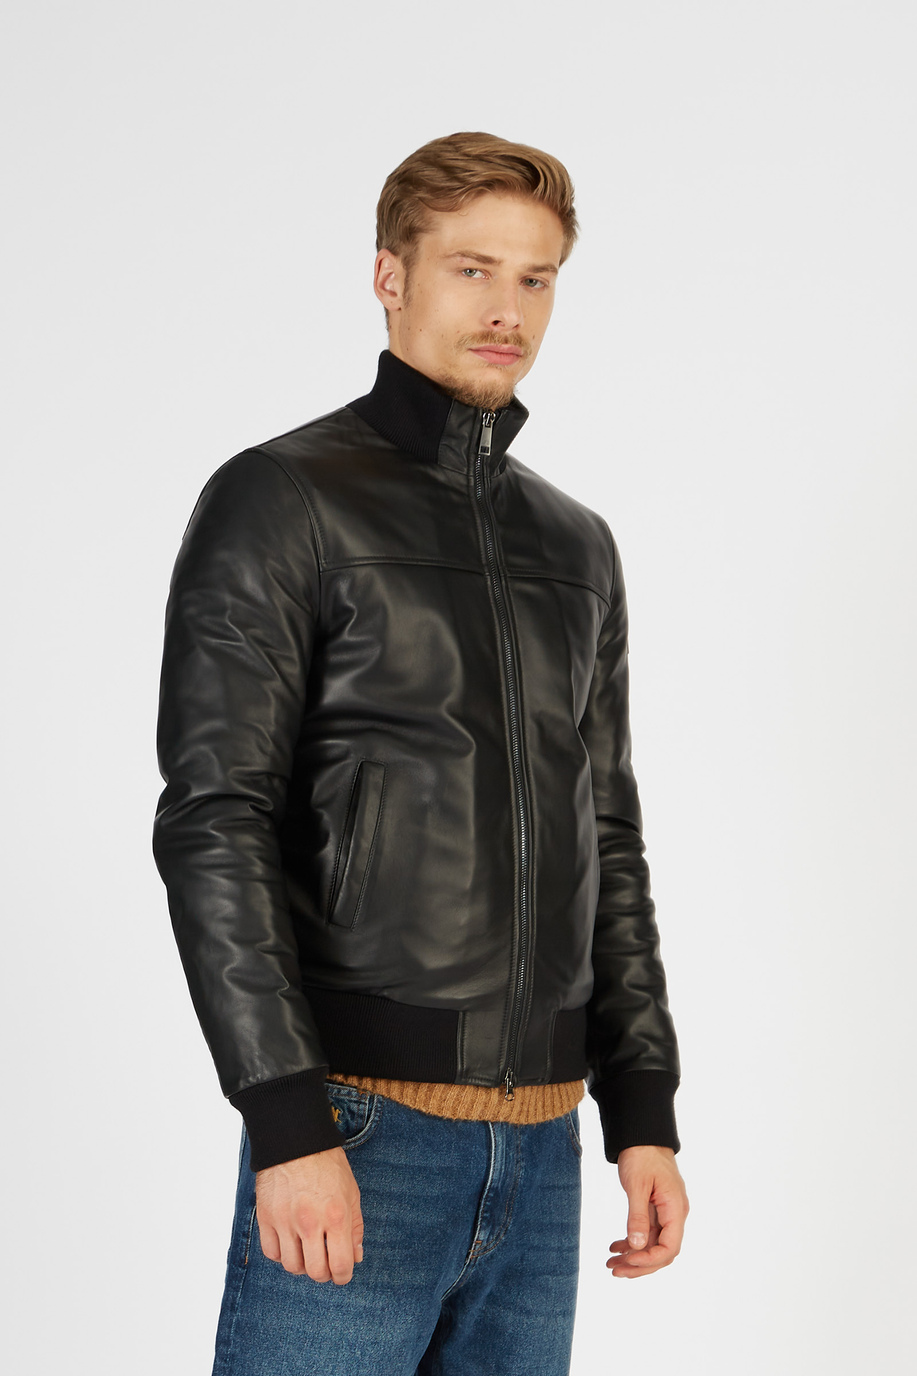 Blue Ribbon leather jacket with regular fit zip front closure - Outerwear and Jackets | La Martina - Official Online Shop